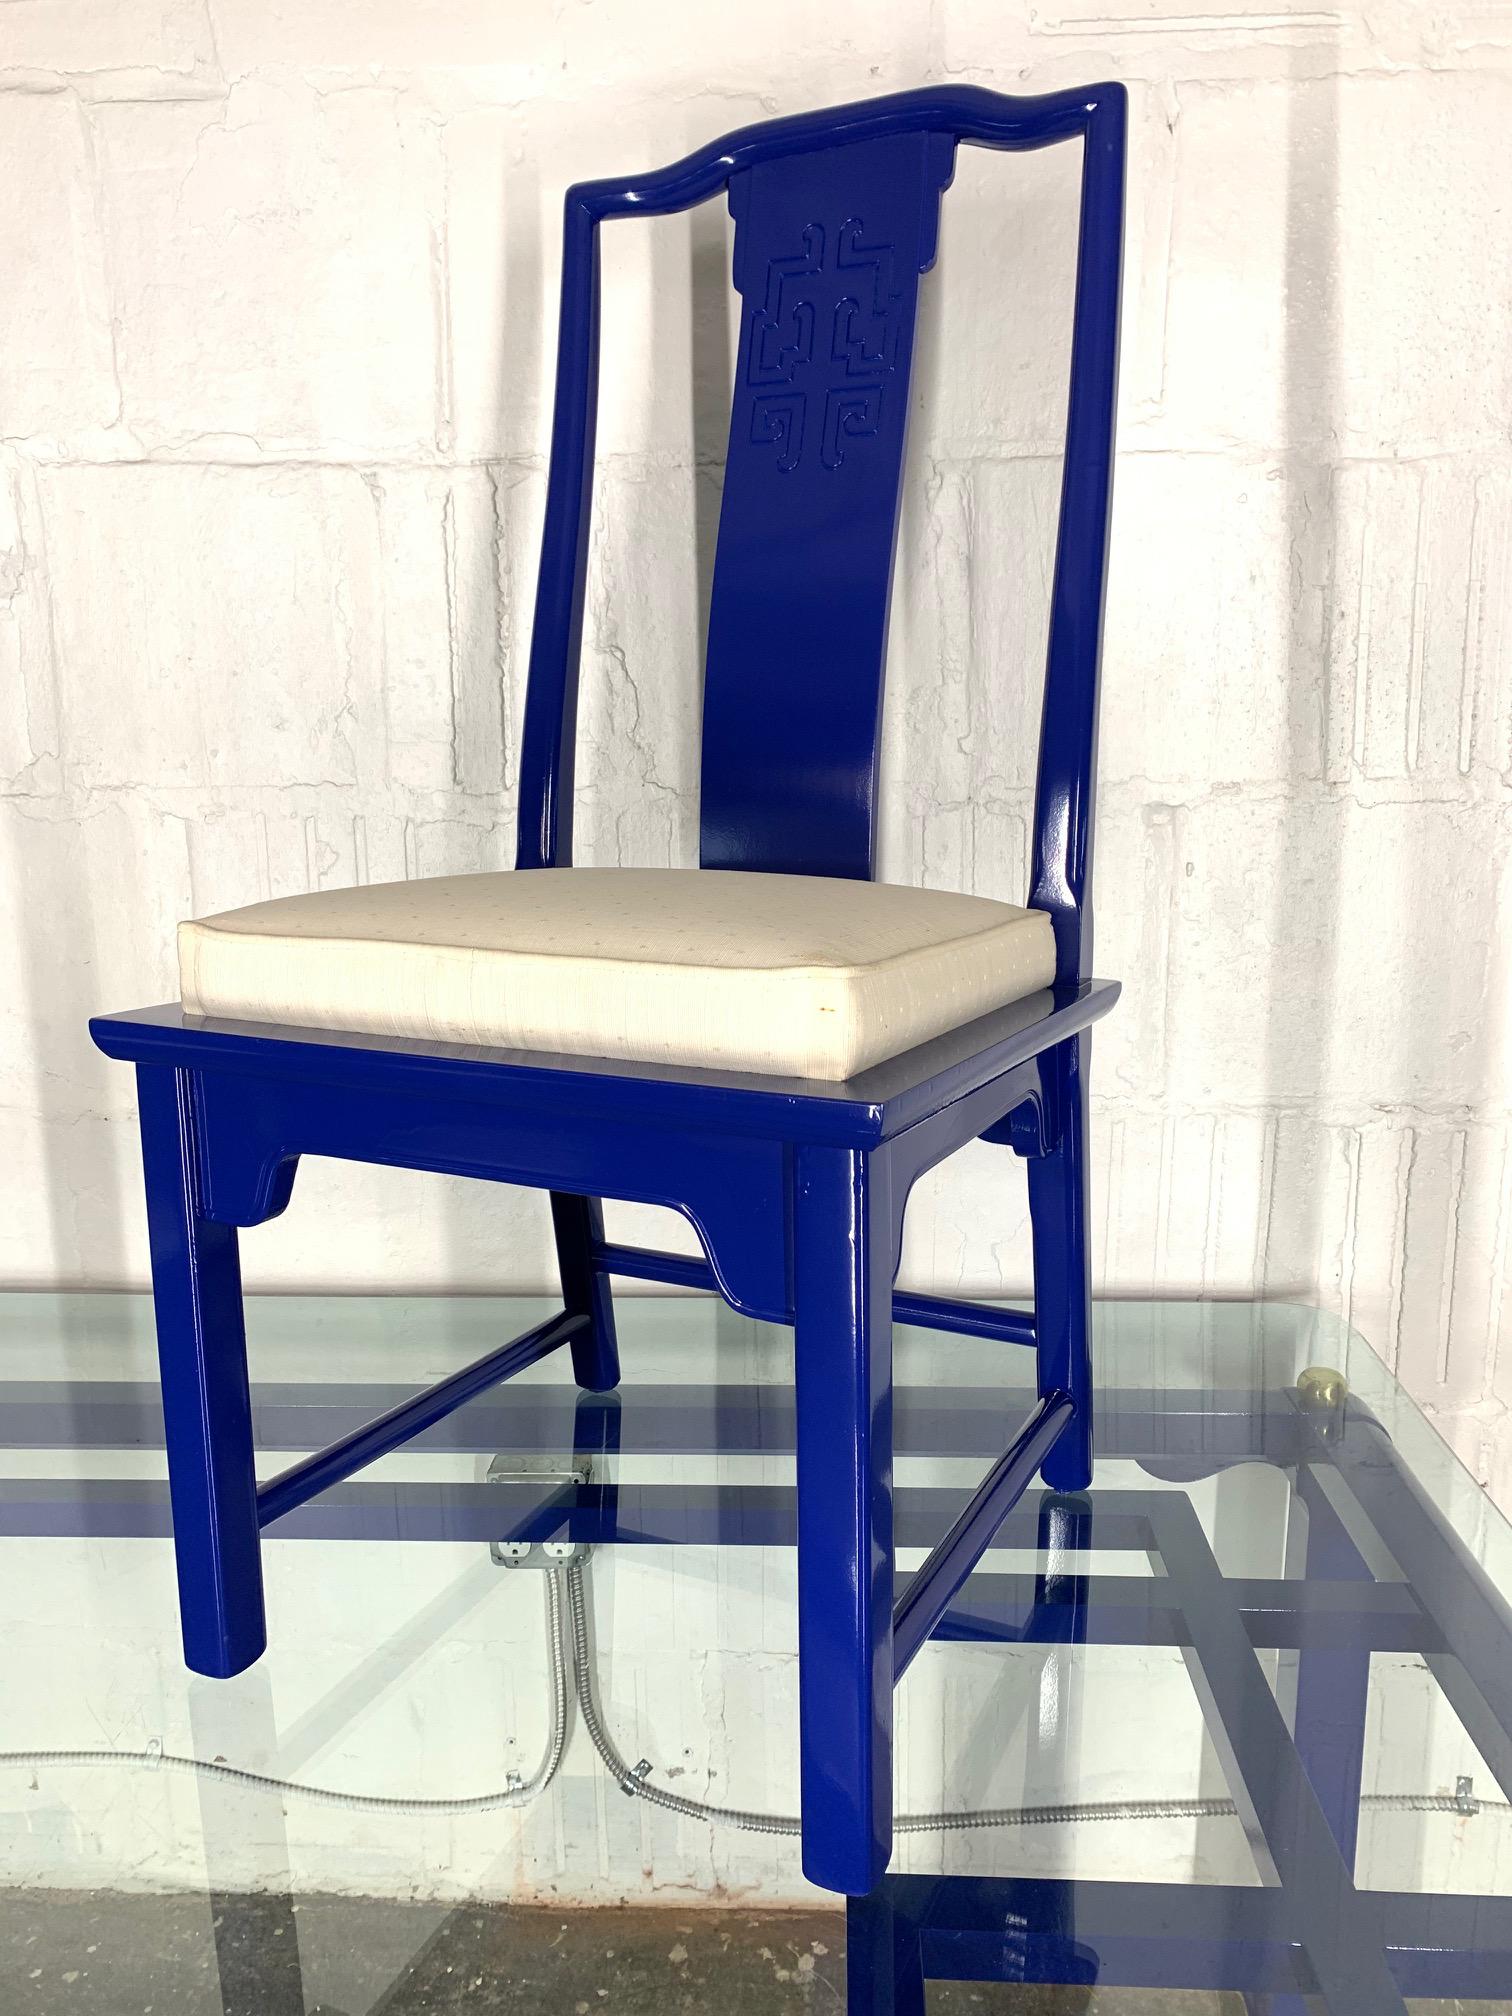 Set of 6 dining chairs by Century Furniture. Part of the Chin Hua collection by Raymond Sobota. Asian chinoiserie style newly lacquered in high gloss blue. Original seat upholstery has some slight discolorations.
Side chairs measure 19